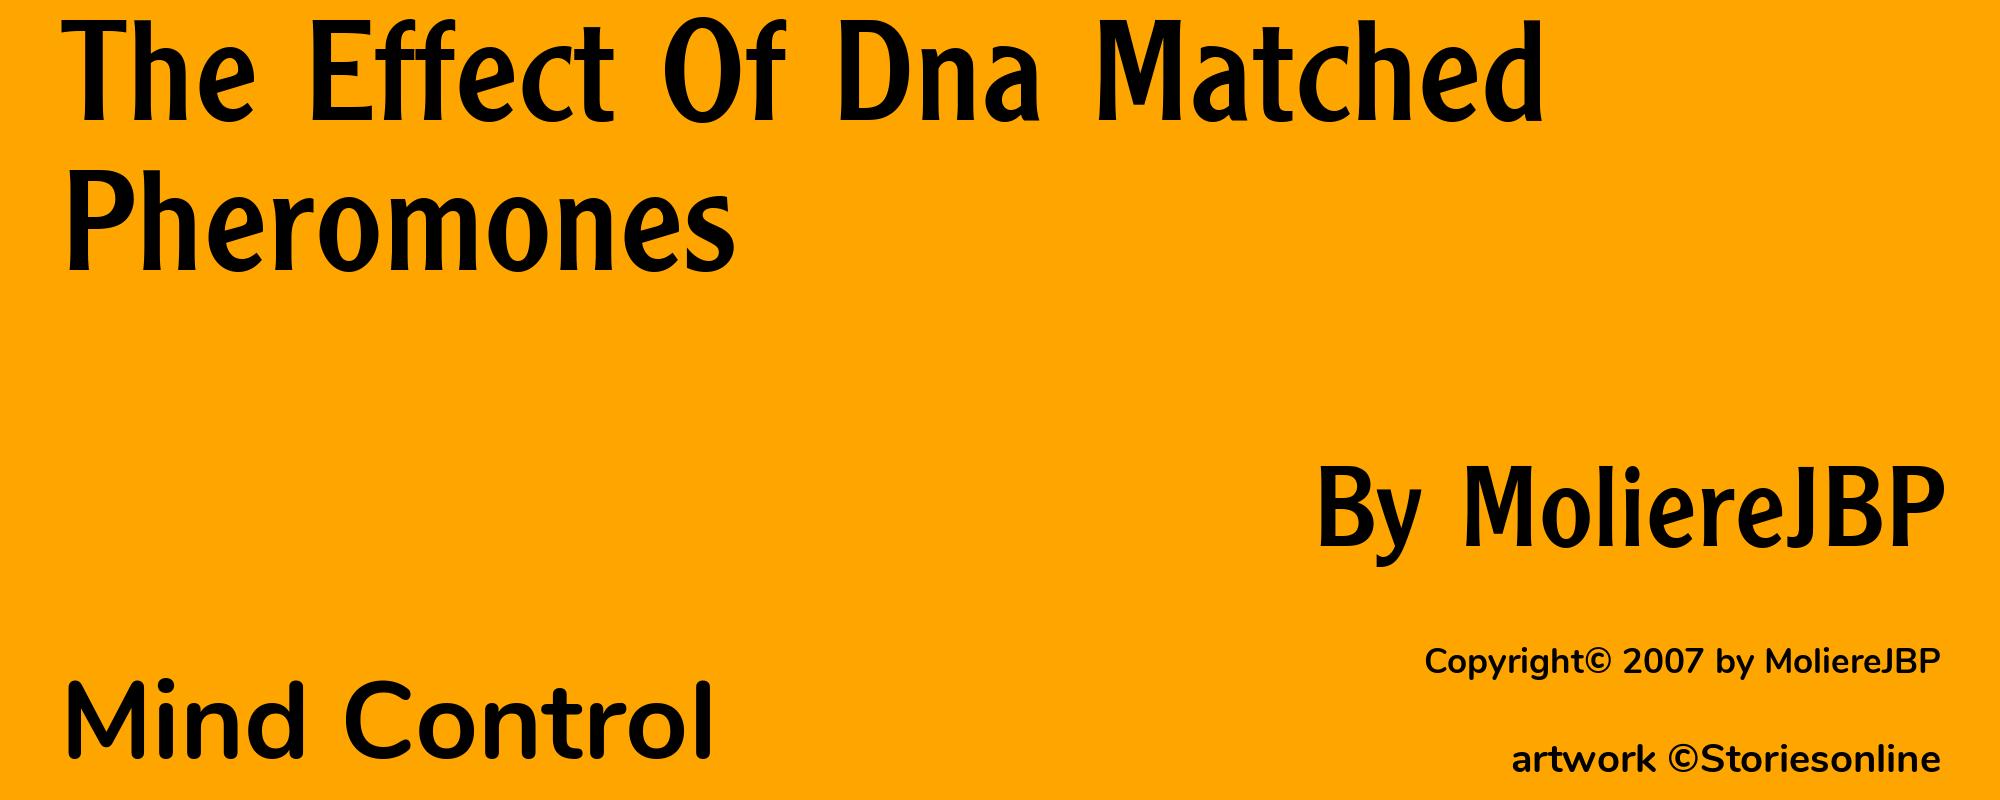 The Effect Of Dna Matched Pheromones - Cover